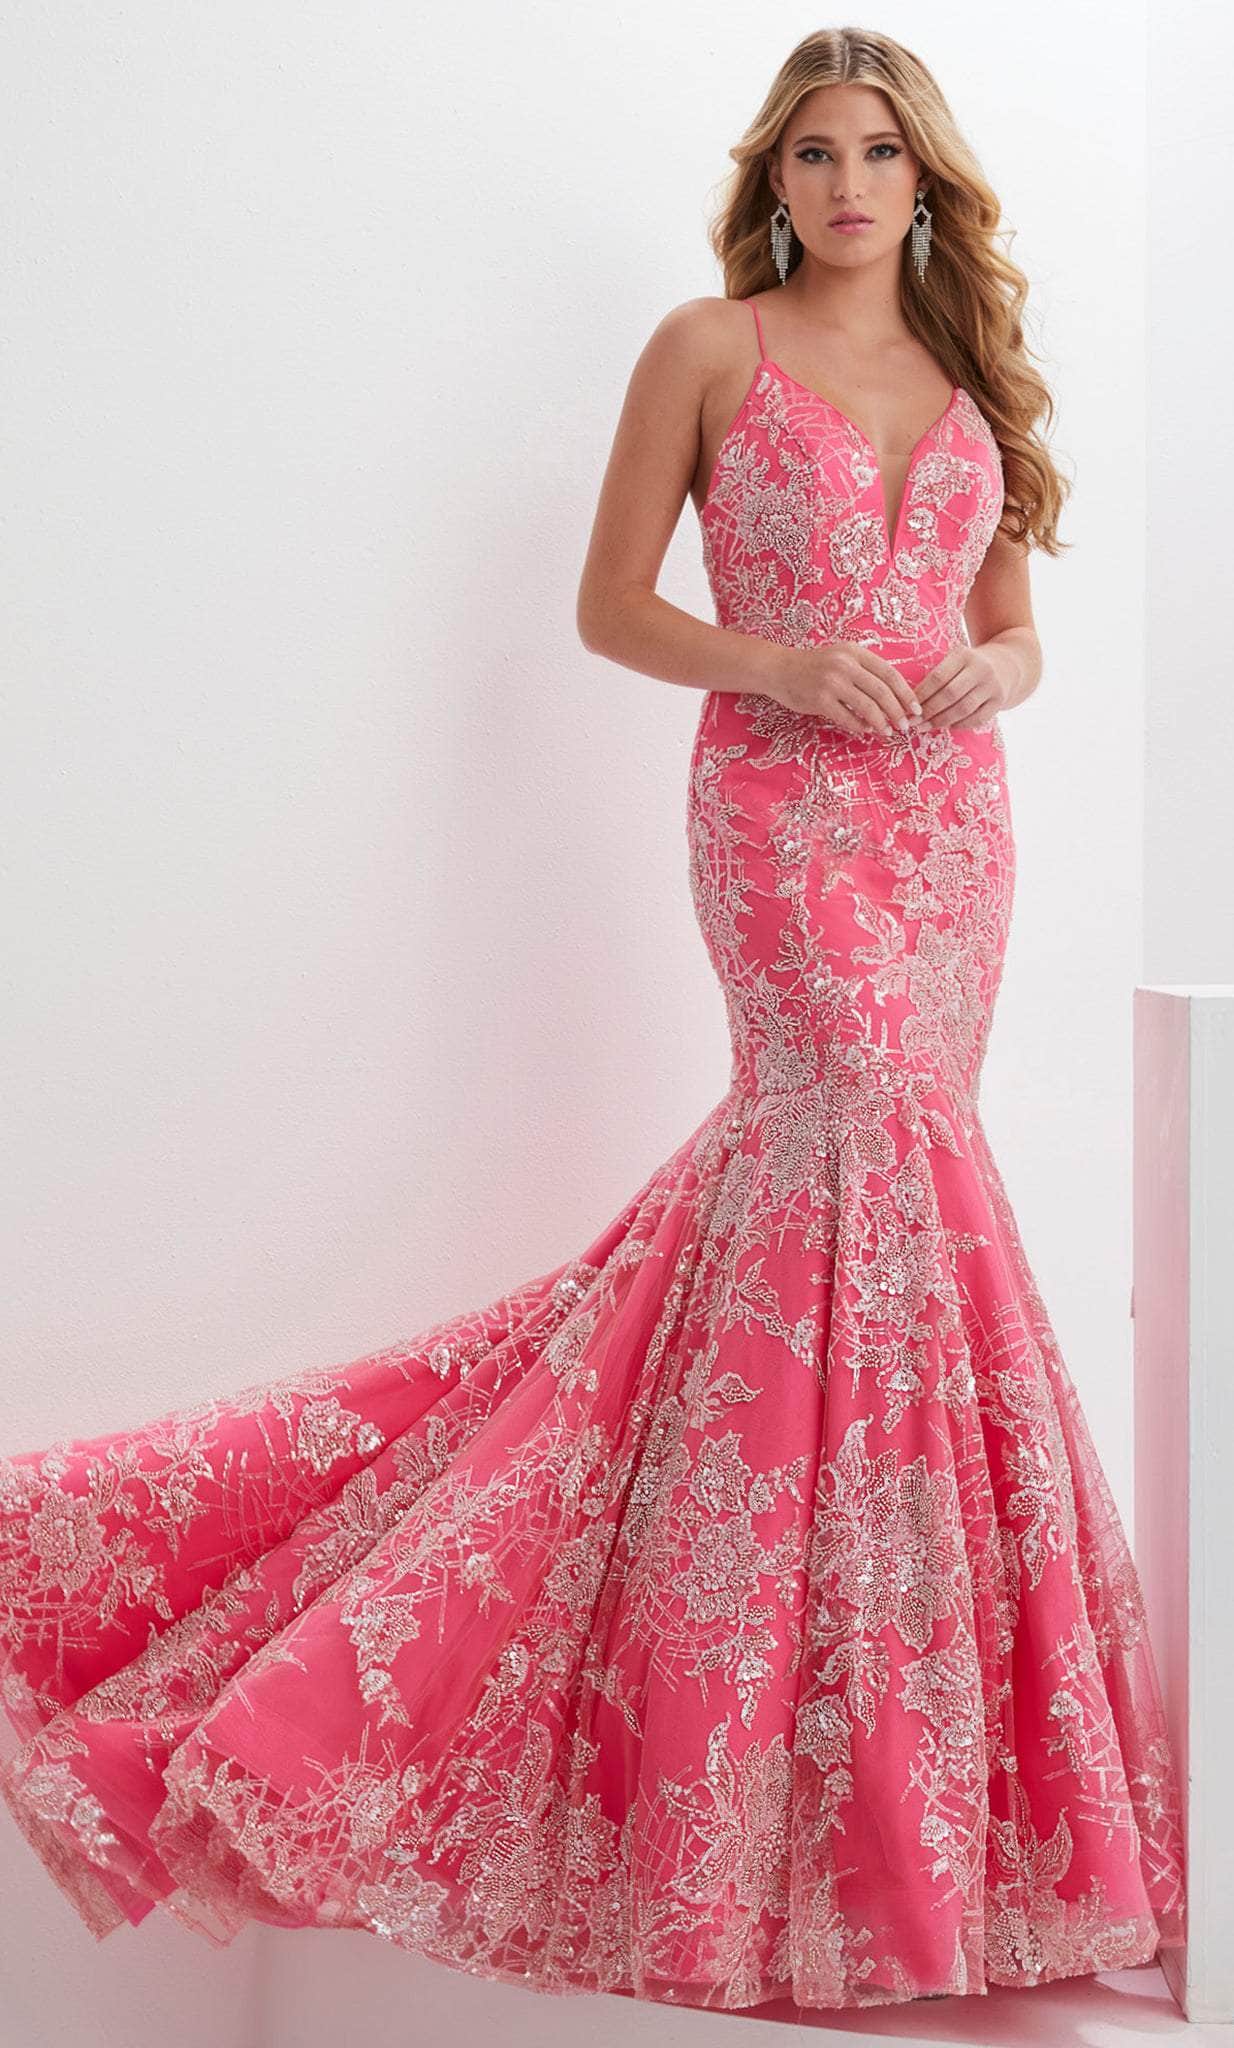 Image of Panoply 14138 - Sweetheart Sequin Lace Evening Gown